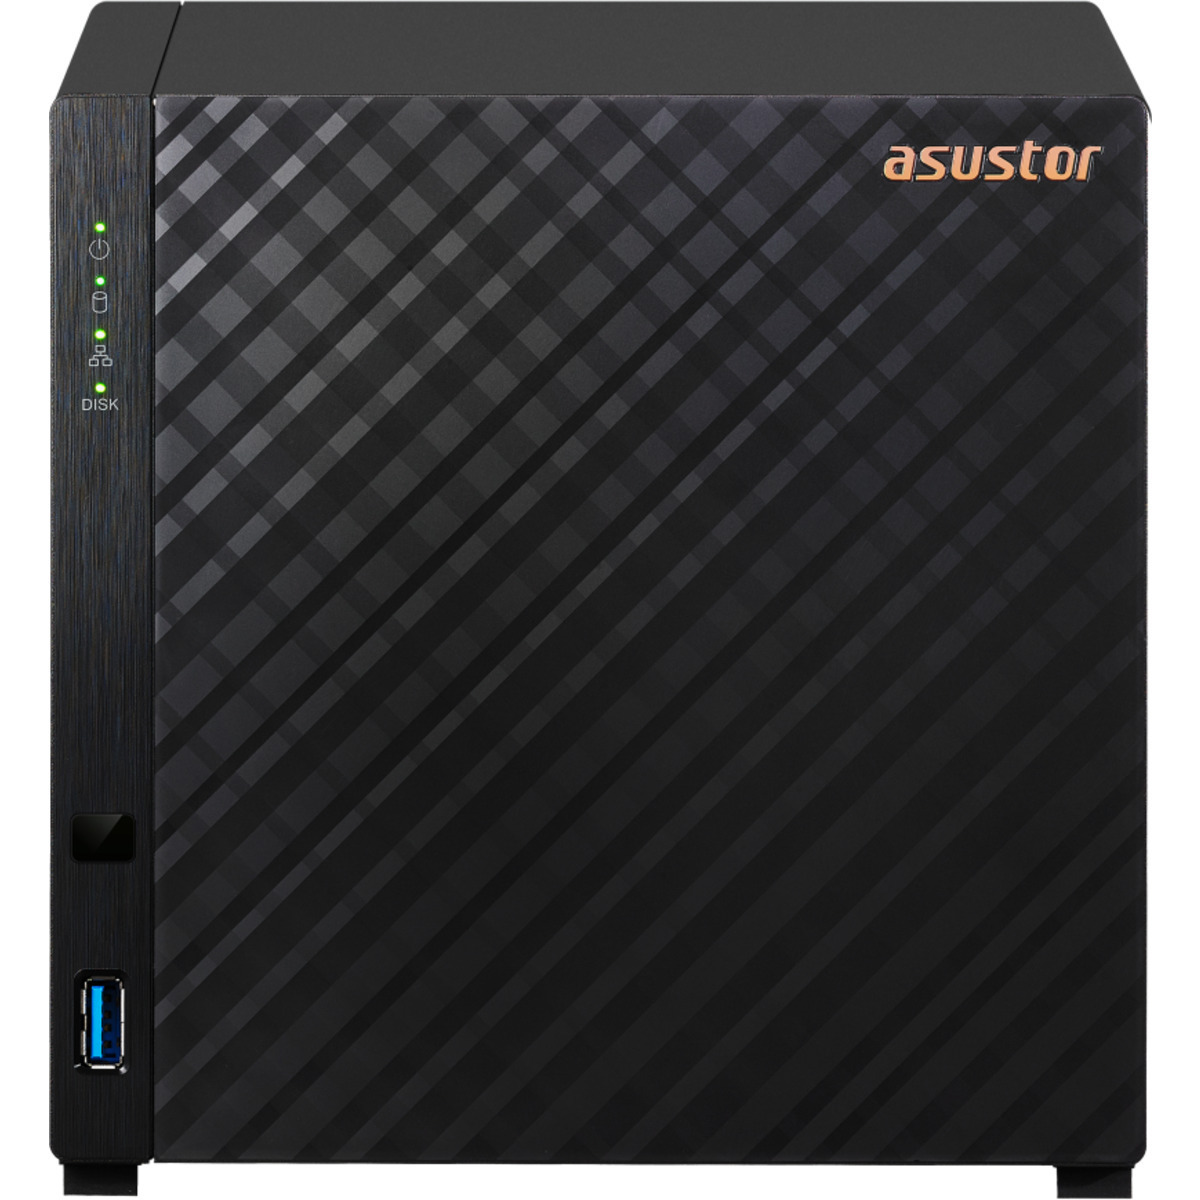 ASUSTOR DRIVESTOR 4 AS1104T 8tb 4-Bay Desktop Personal / Basic Home / Small Office NAS - Network Attached Storage Device 2x4tb Western Digital Red Pro WD4003FFBX 3.5 7200rpm SATA 6Gb/s HDD NAS Class Drives Installed - Burn-In Tested DRIVESTOR 4 AS1104T